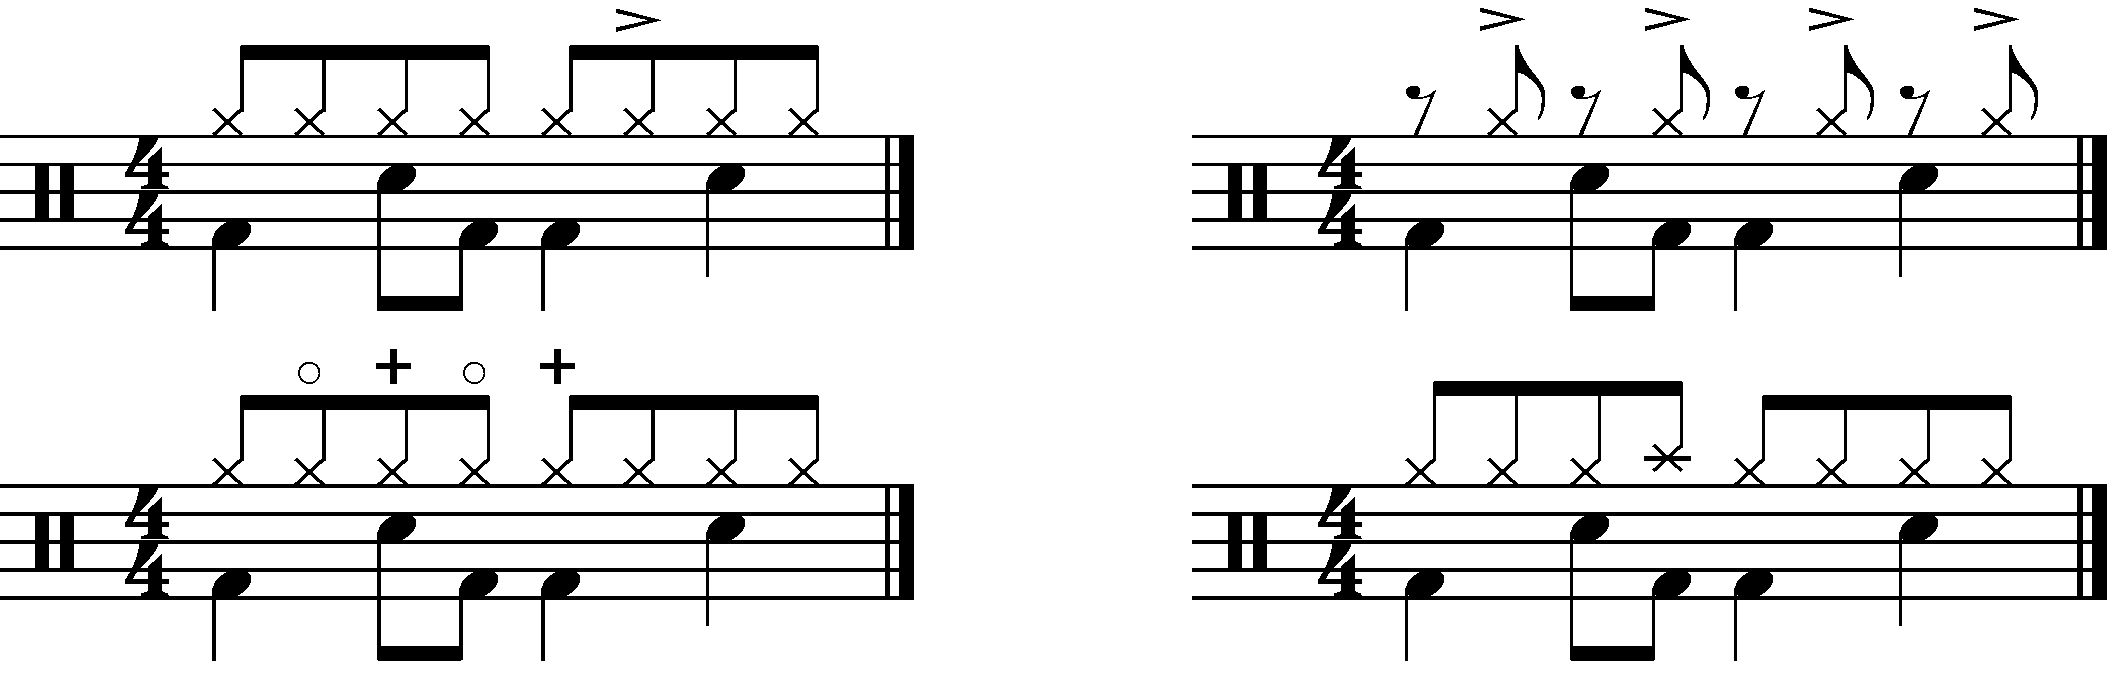 Four options for the B section